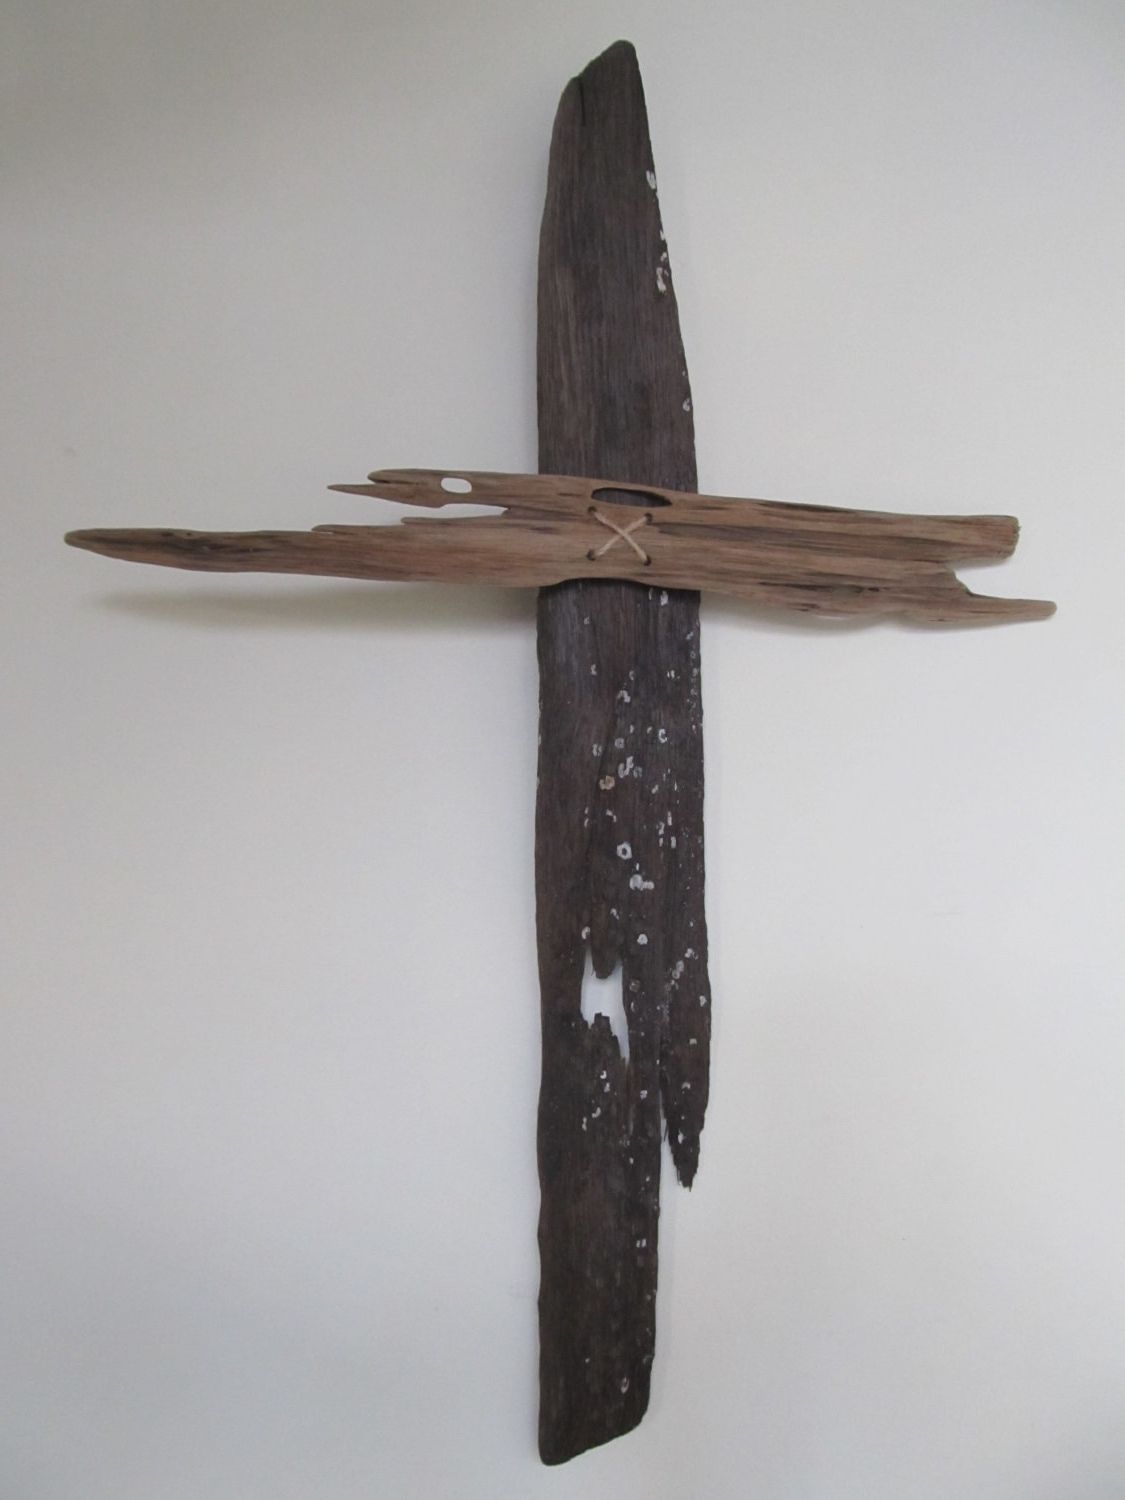 Sale – Simple & Aesthetic Drftwood Cross – Driftwood Art, Jute And Regarding Most Recently Released Driftwood Wall Art For Sale (View 11 of 15)